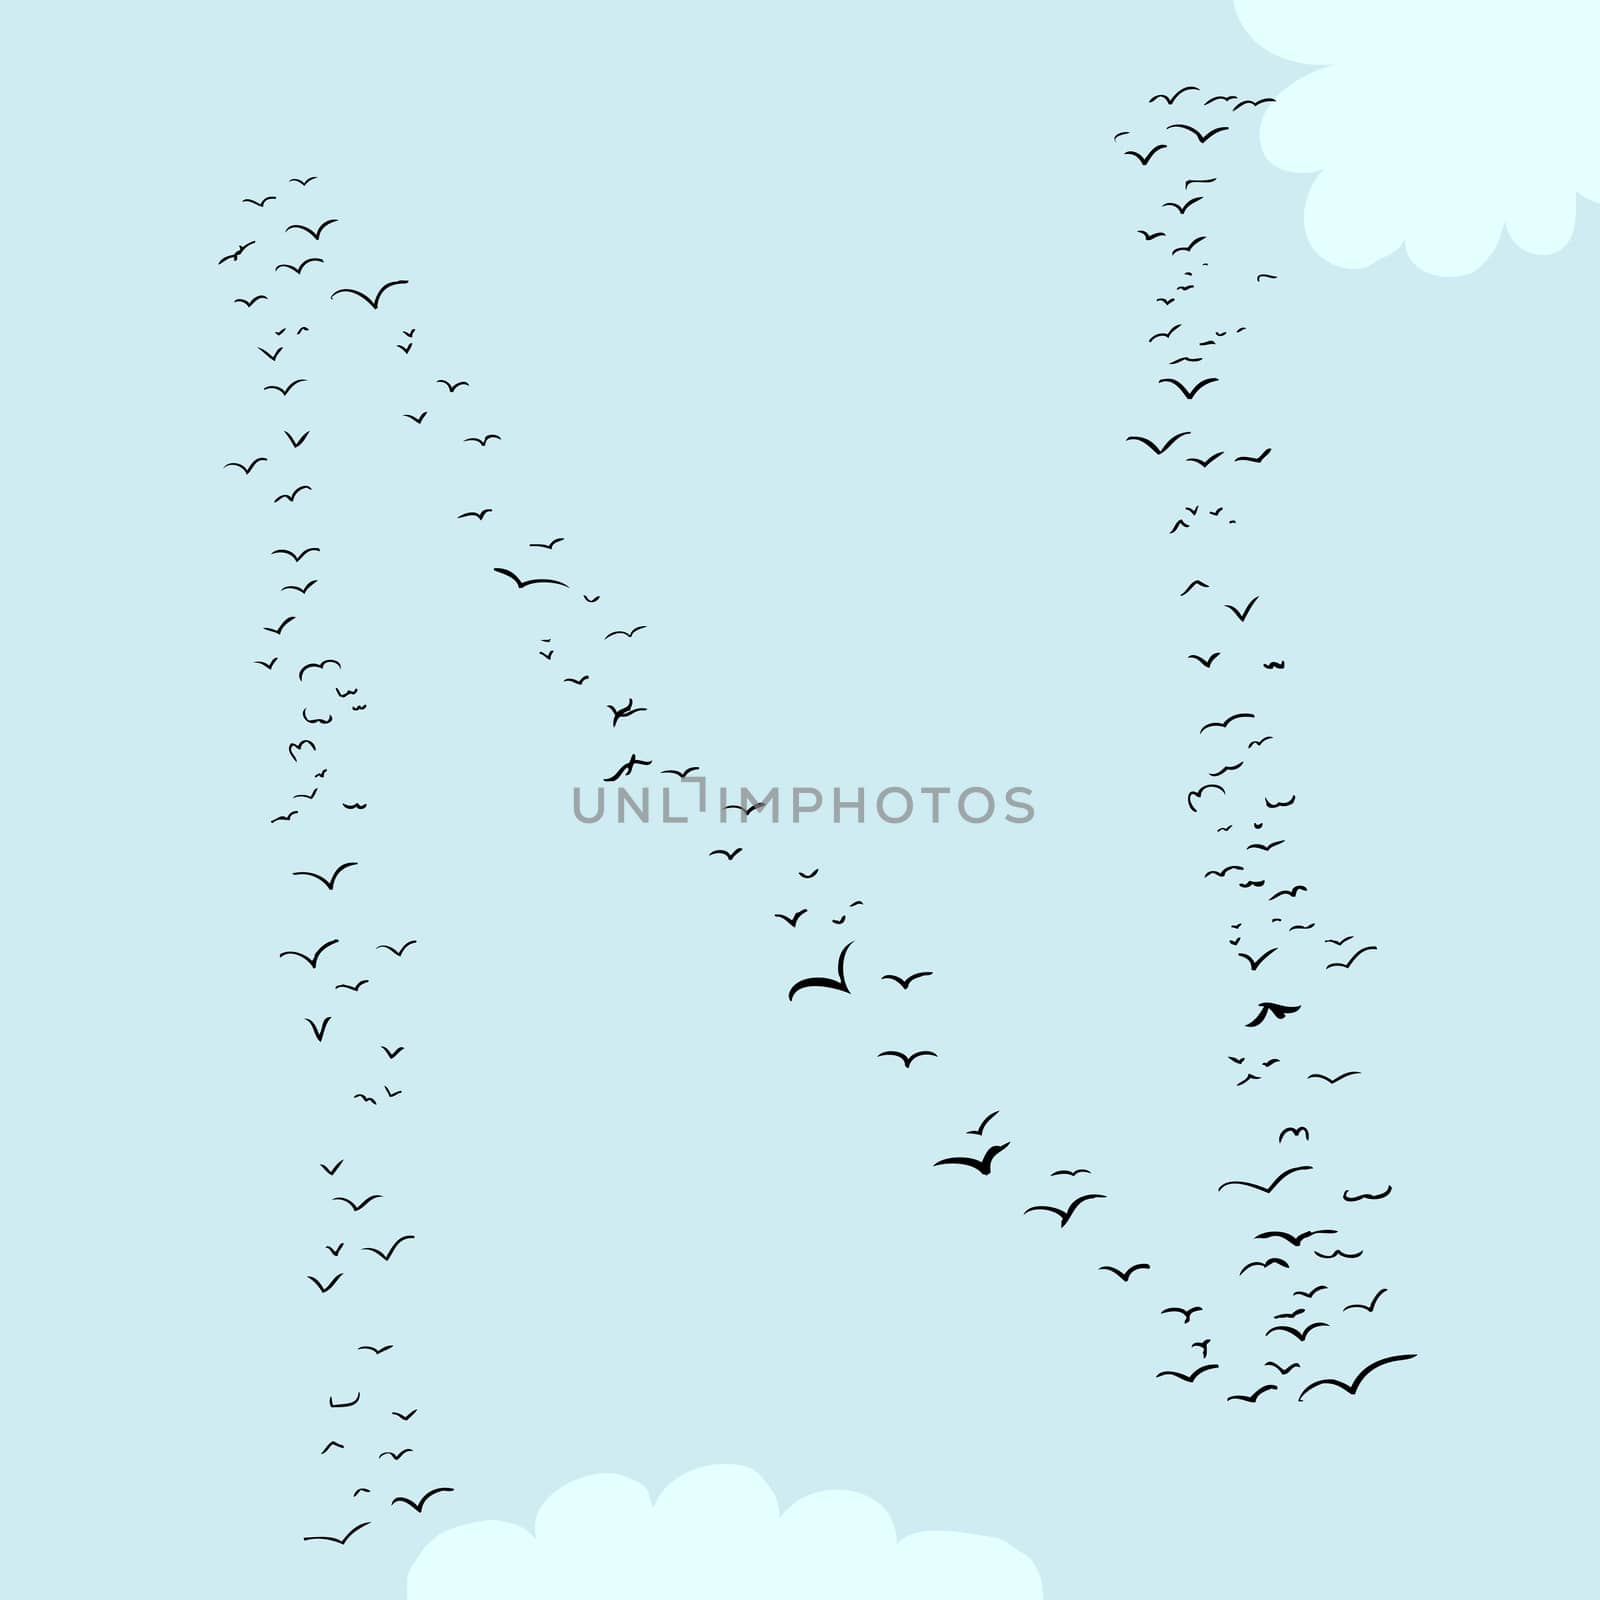 Illustration of a flock of birds in the shape of the letter n